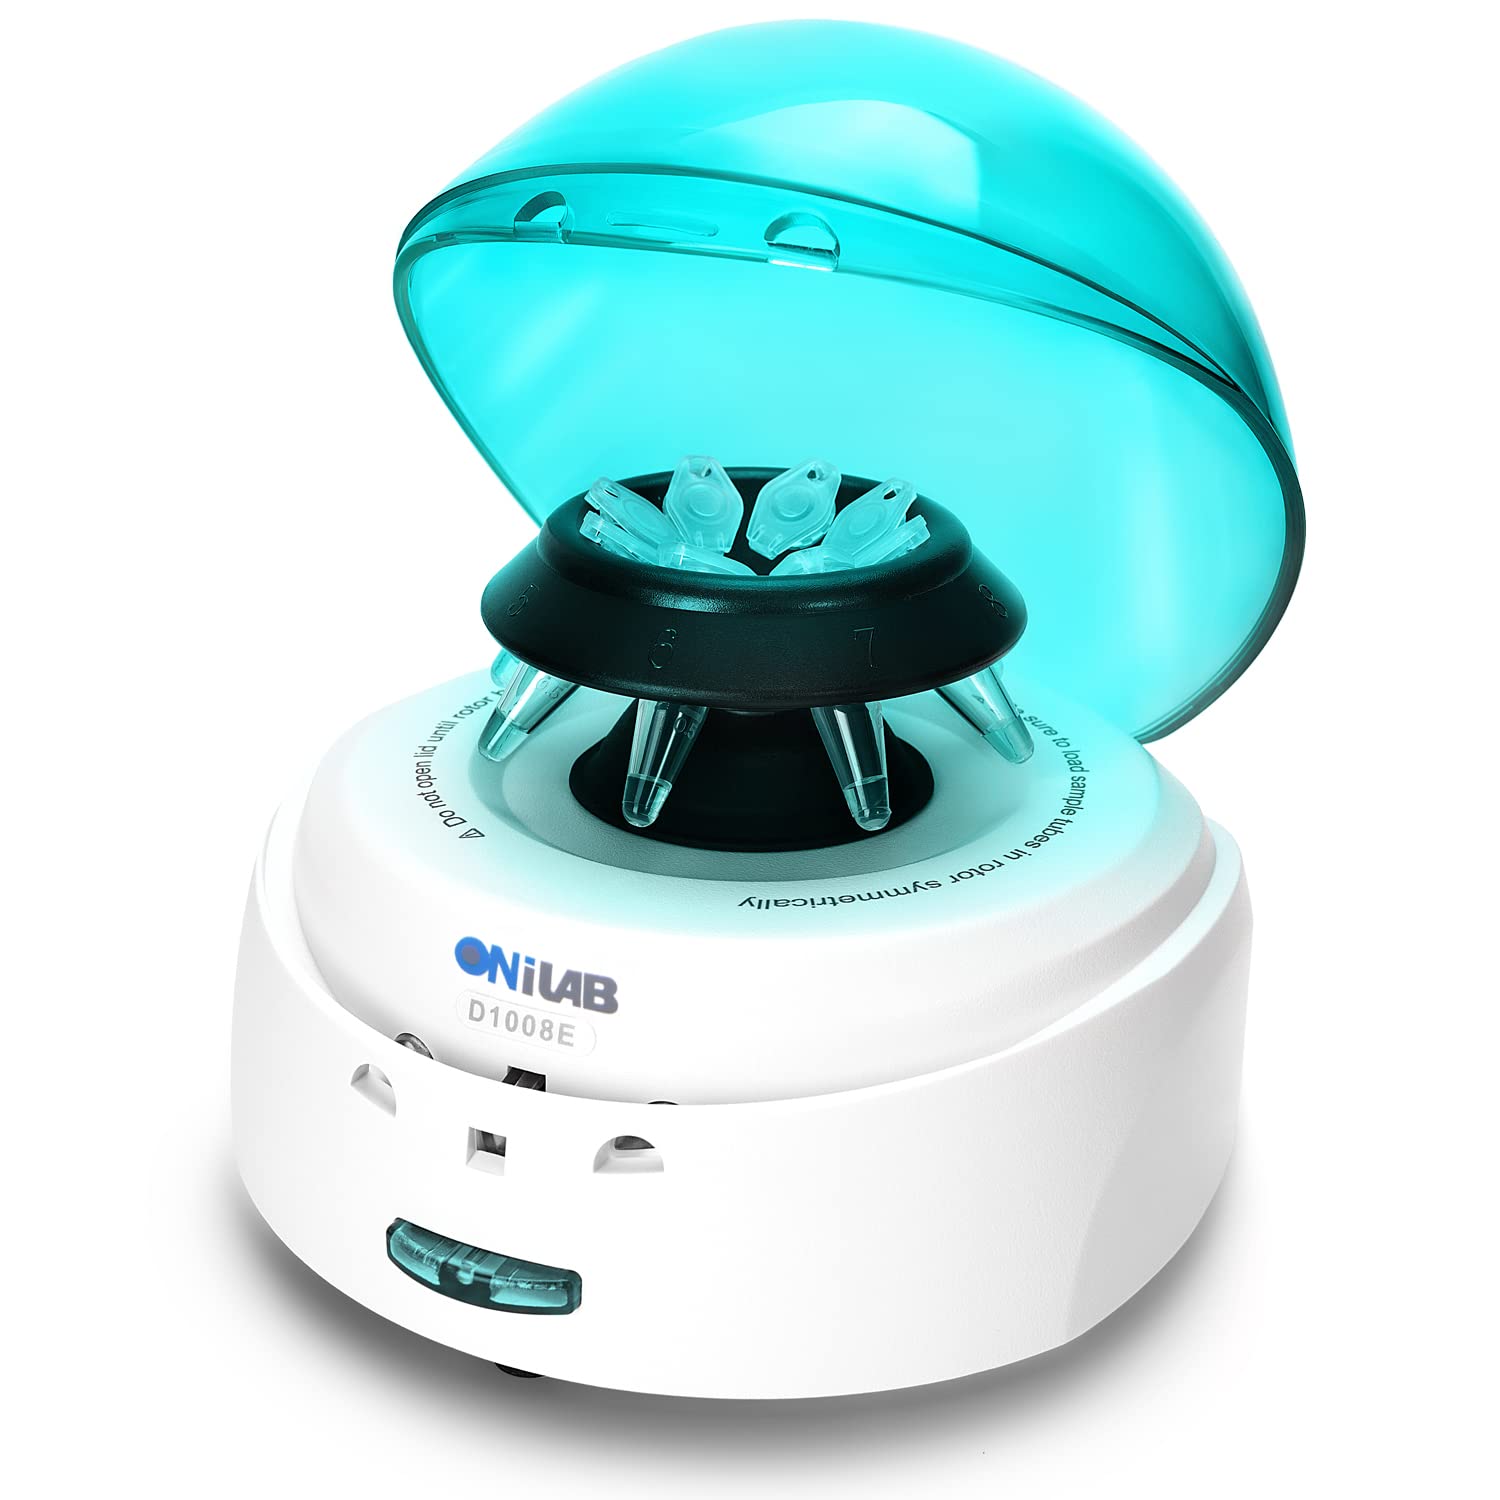 Onilabs Scientific Mini Centrifuge 7000Rpm, 2680 X G Rcf, Lab Benchtop Centrifuge With 2 Rotors For 8 X 0.20.51.52.0Ml And 0.2Ml